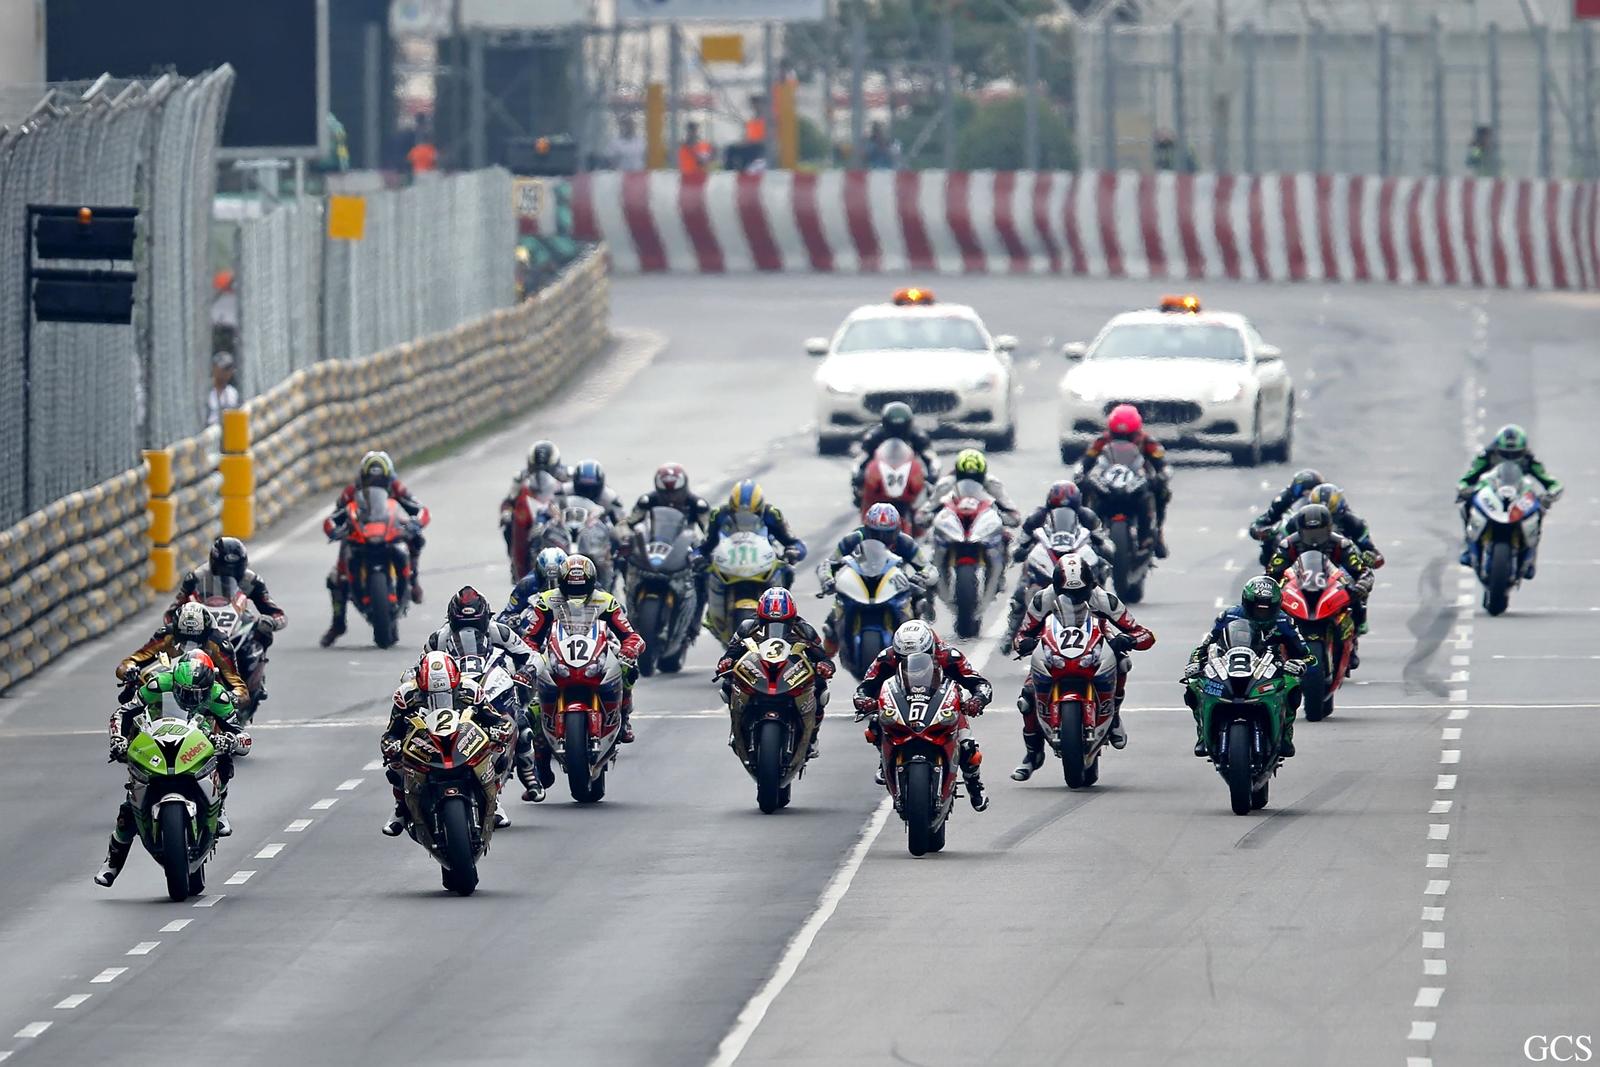 Race Results From The Sun City Macau Motorcycle Grand Prix